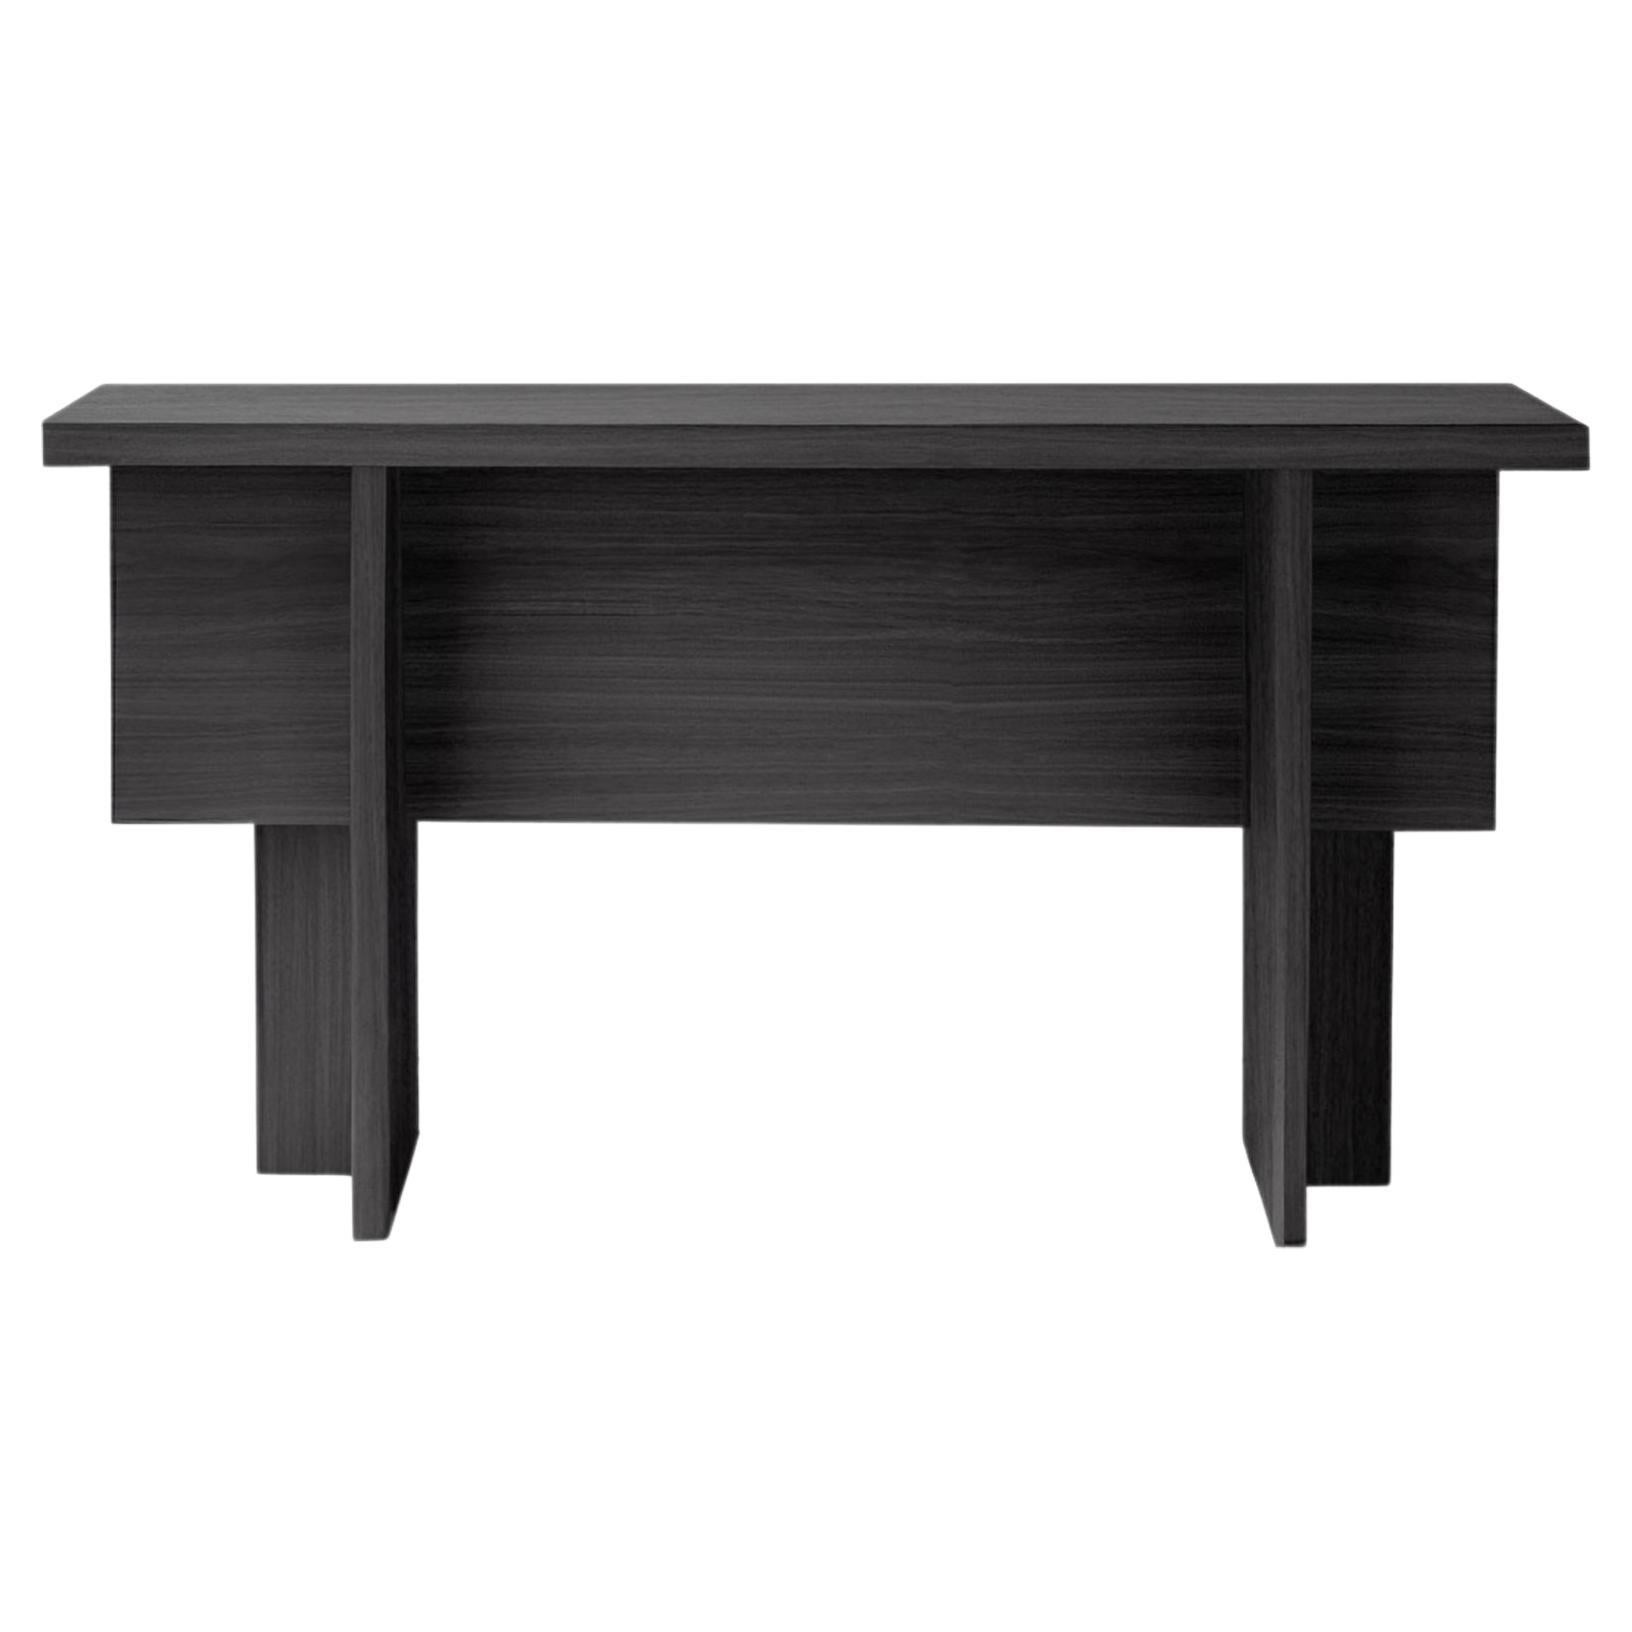 Console Table, Sideboard Made of Black Tinted Oak Solid Wood, Narrow Console